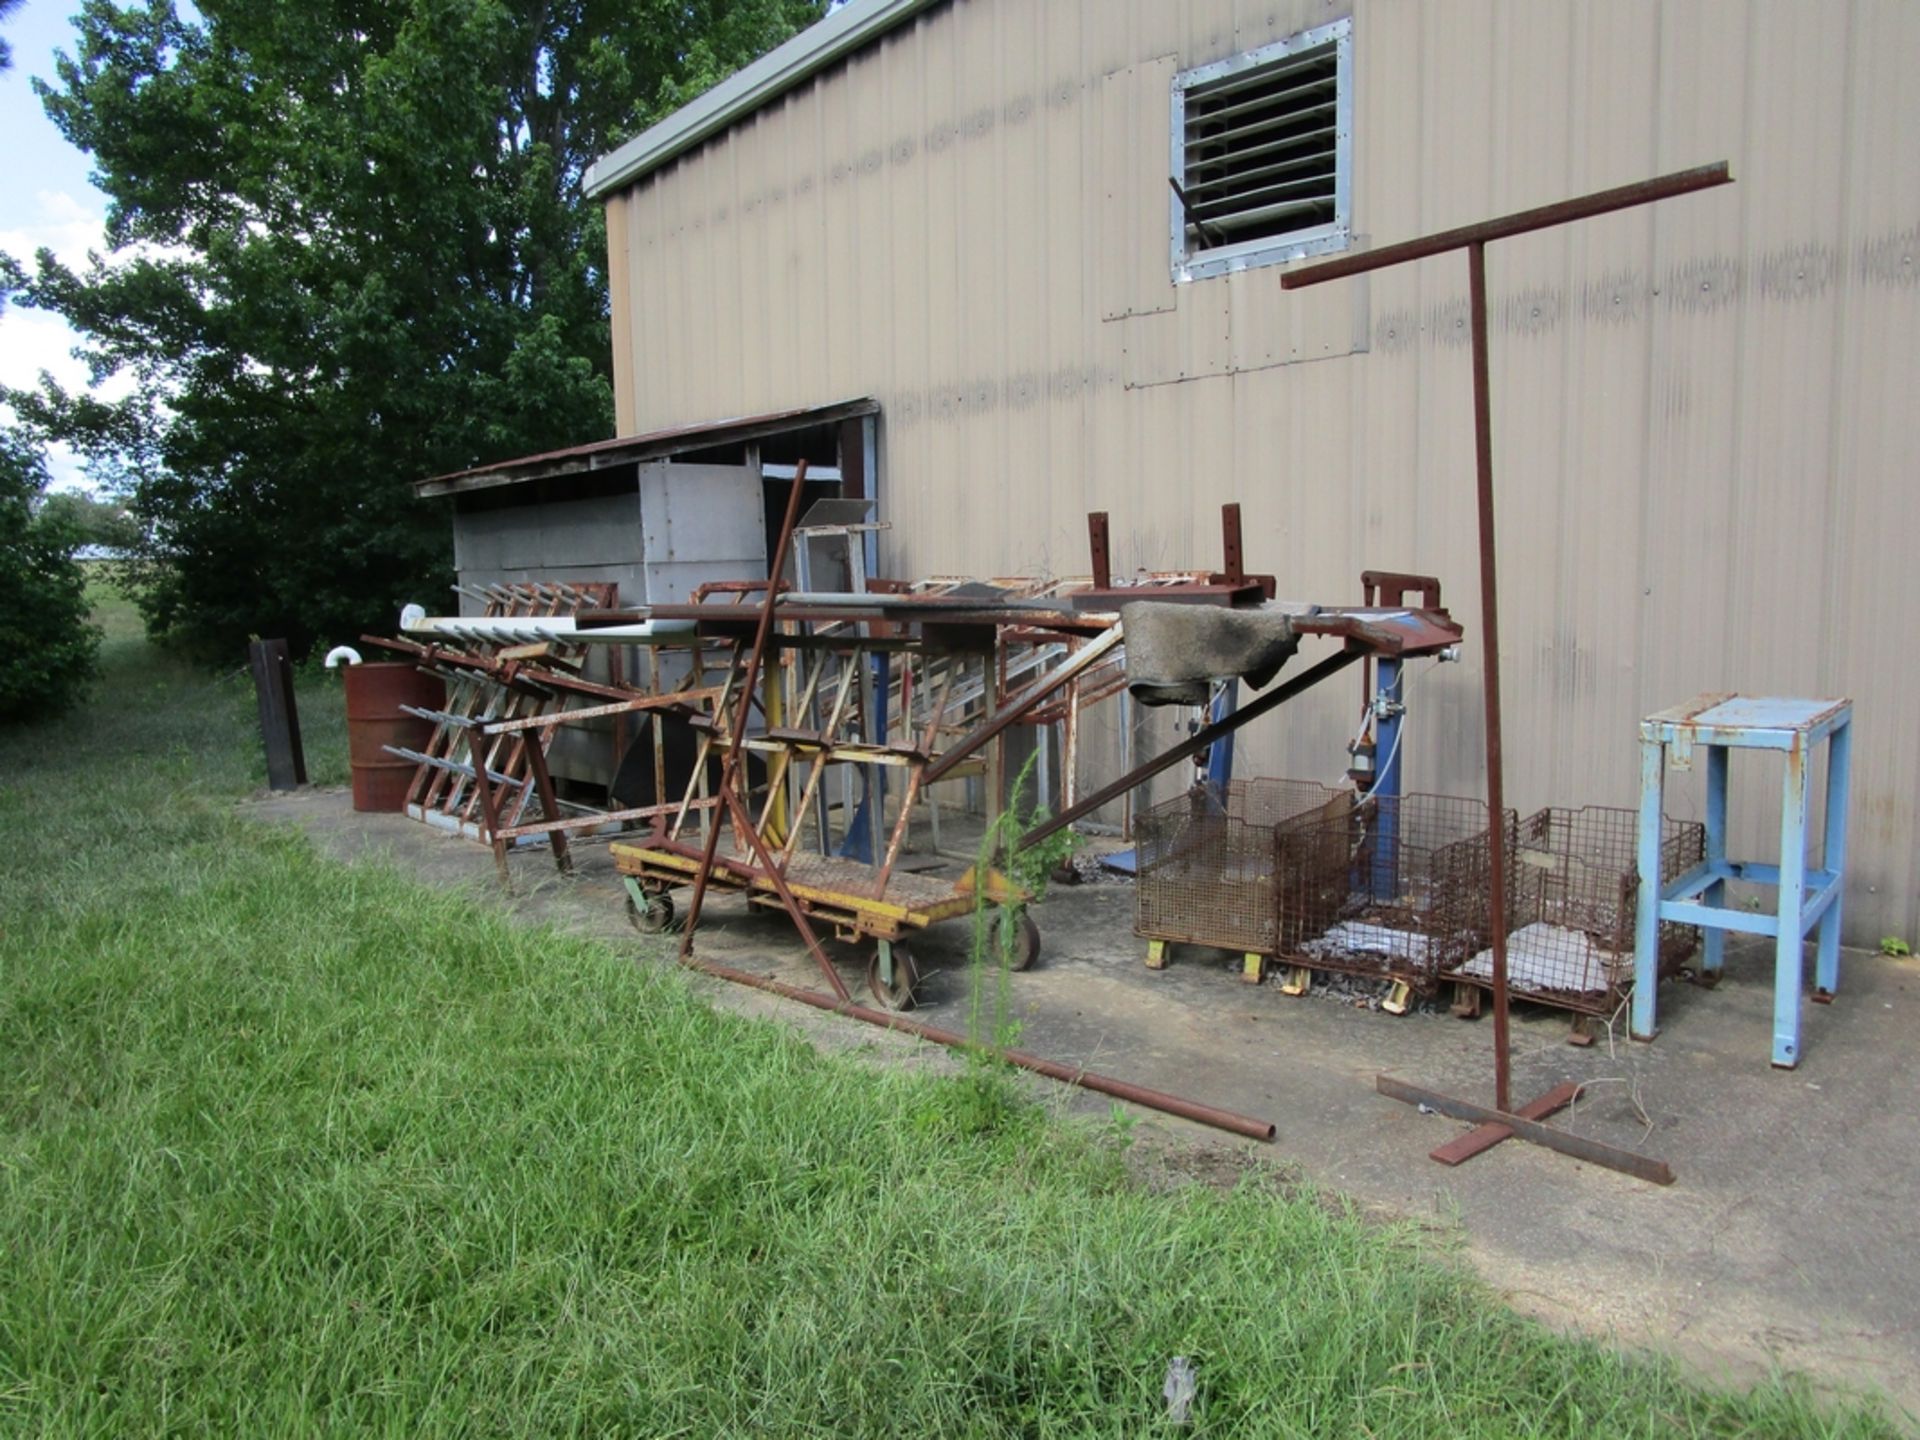 Metal A-Frame Racks And Carts In Back Of Shop